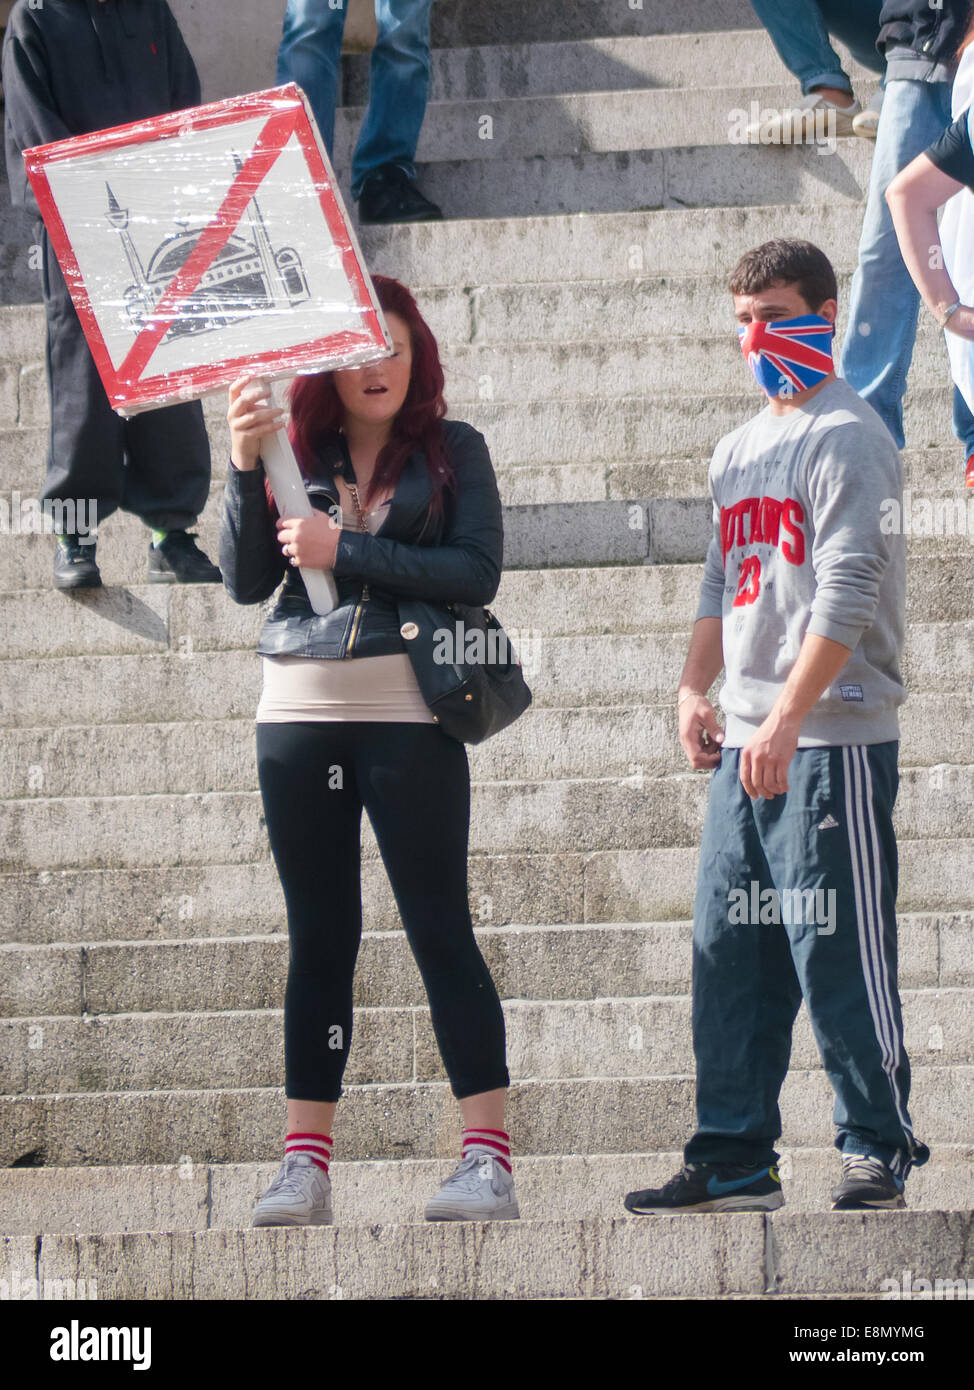 A girl holds an anti mosque sign standing beside a male with his face covered by a union flag mask during an English Defence League Protest in Portsmouth guildhall square, England Stock Photo